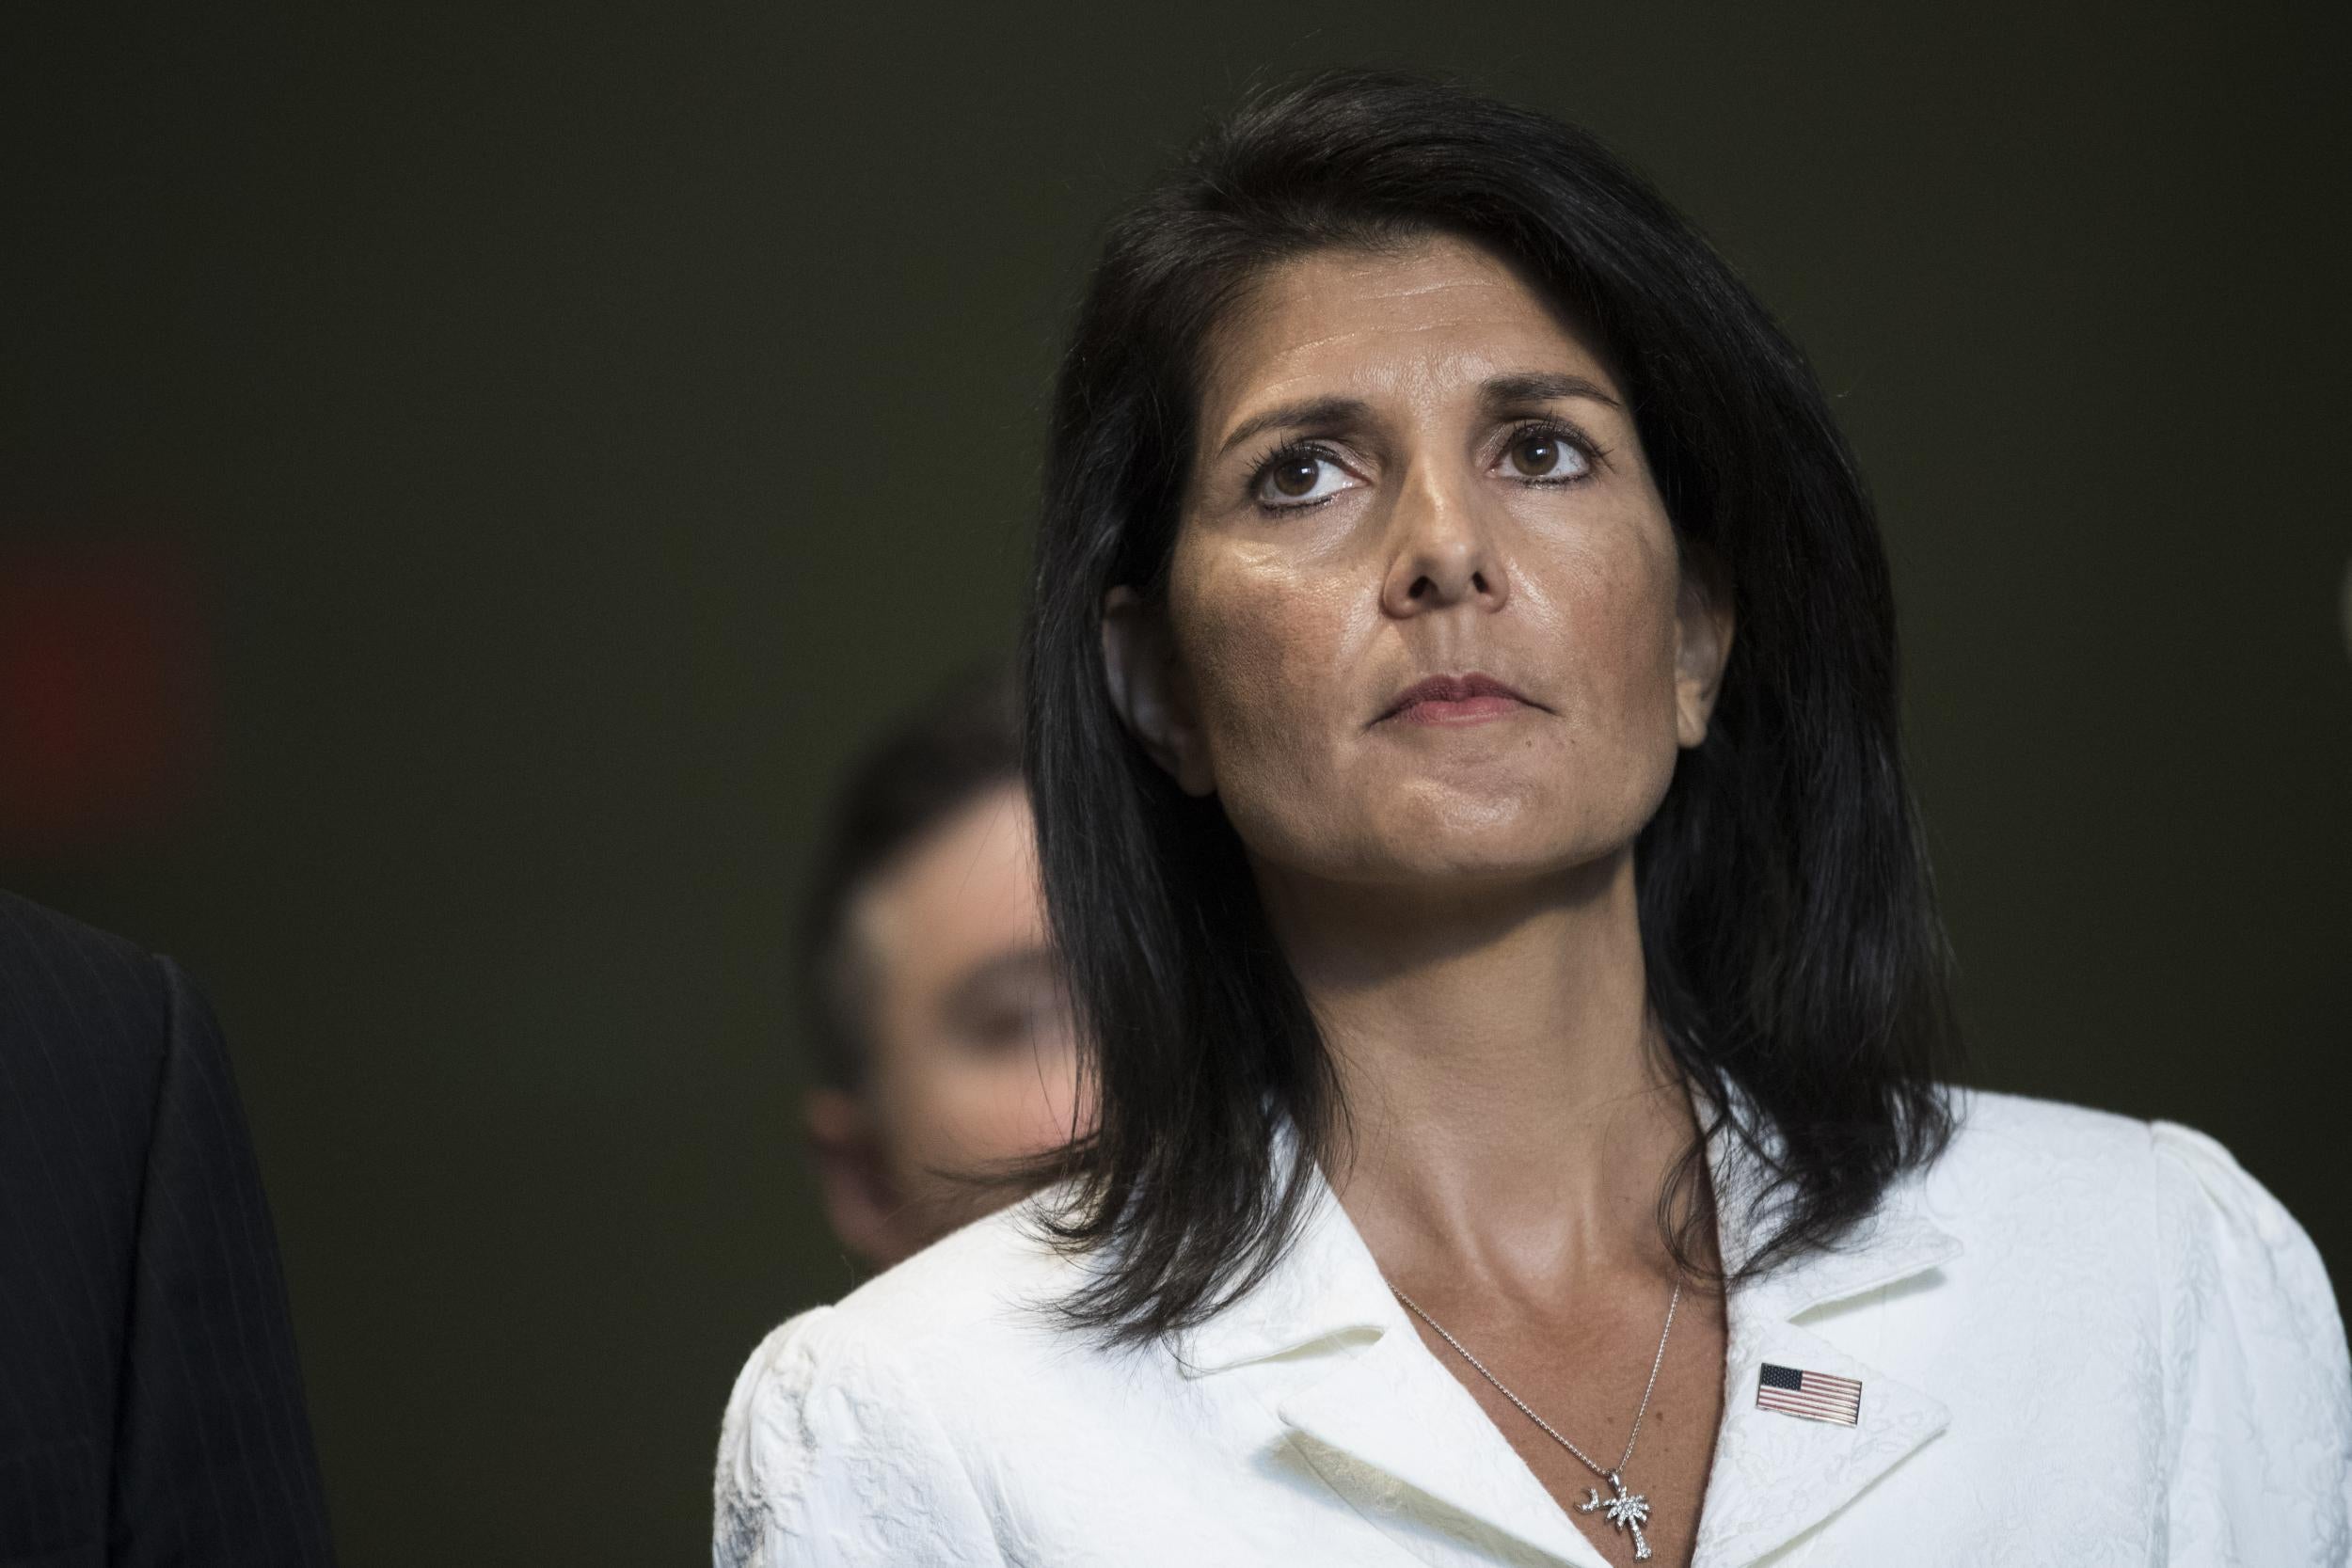 US Ambassador to the United Nations Nikki Haley said President Trump's tweets do not 'interfere' with her diplomatic work